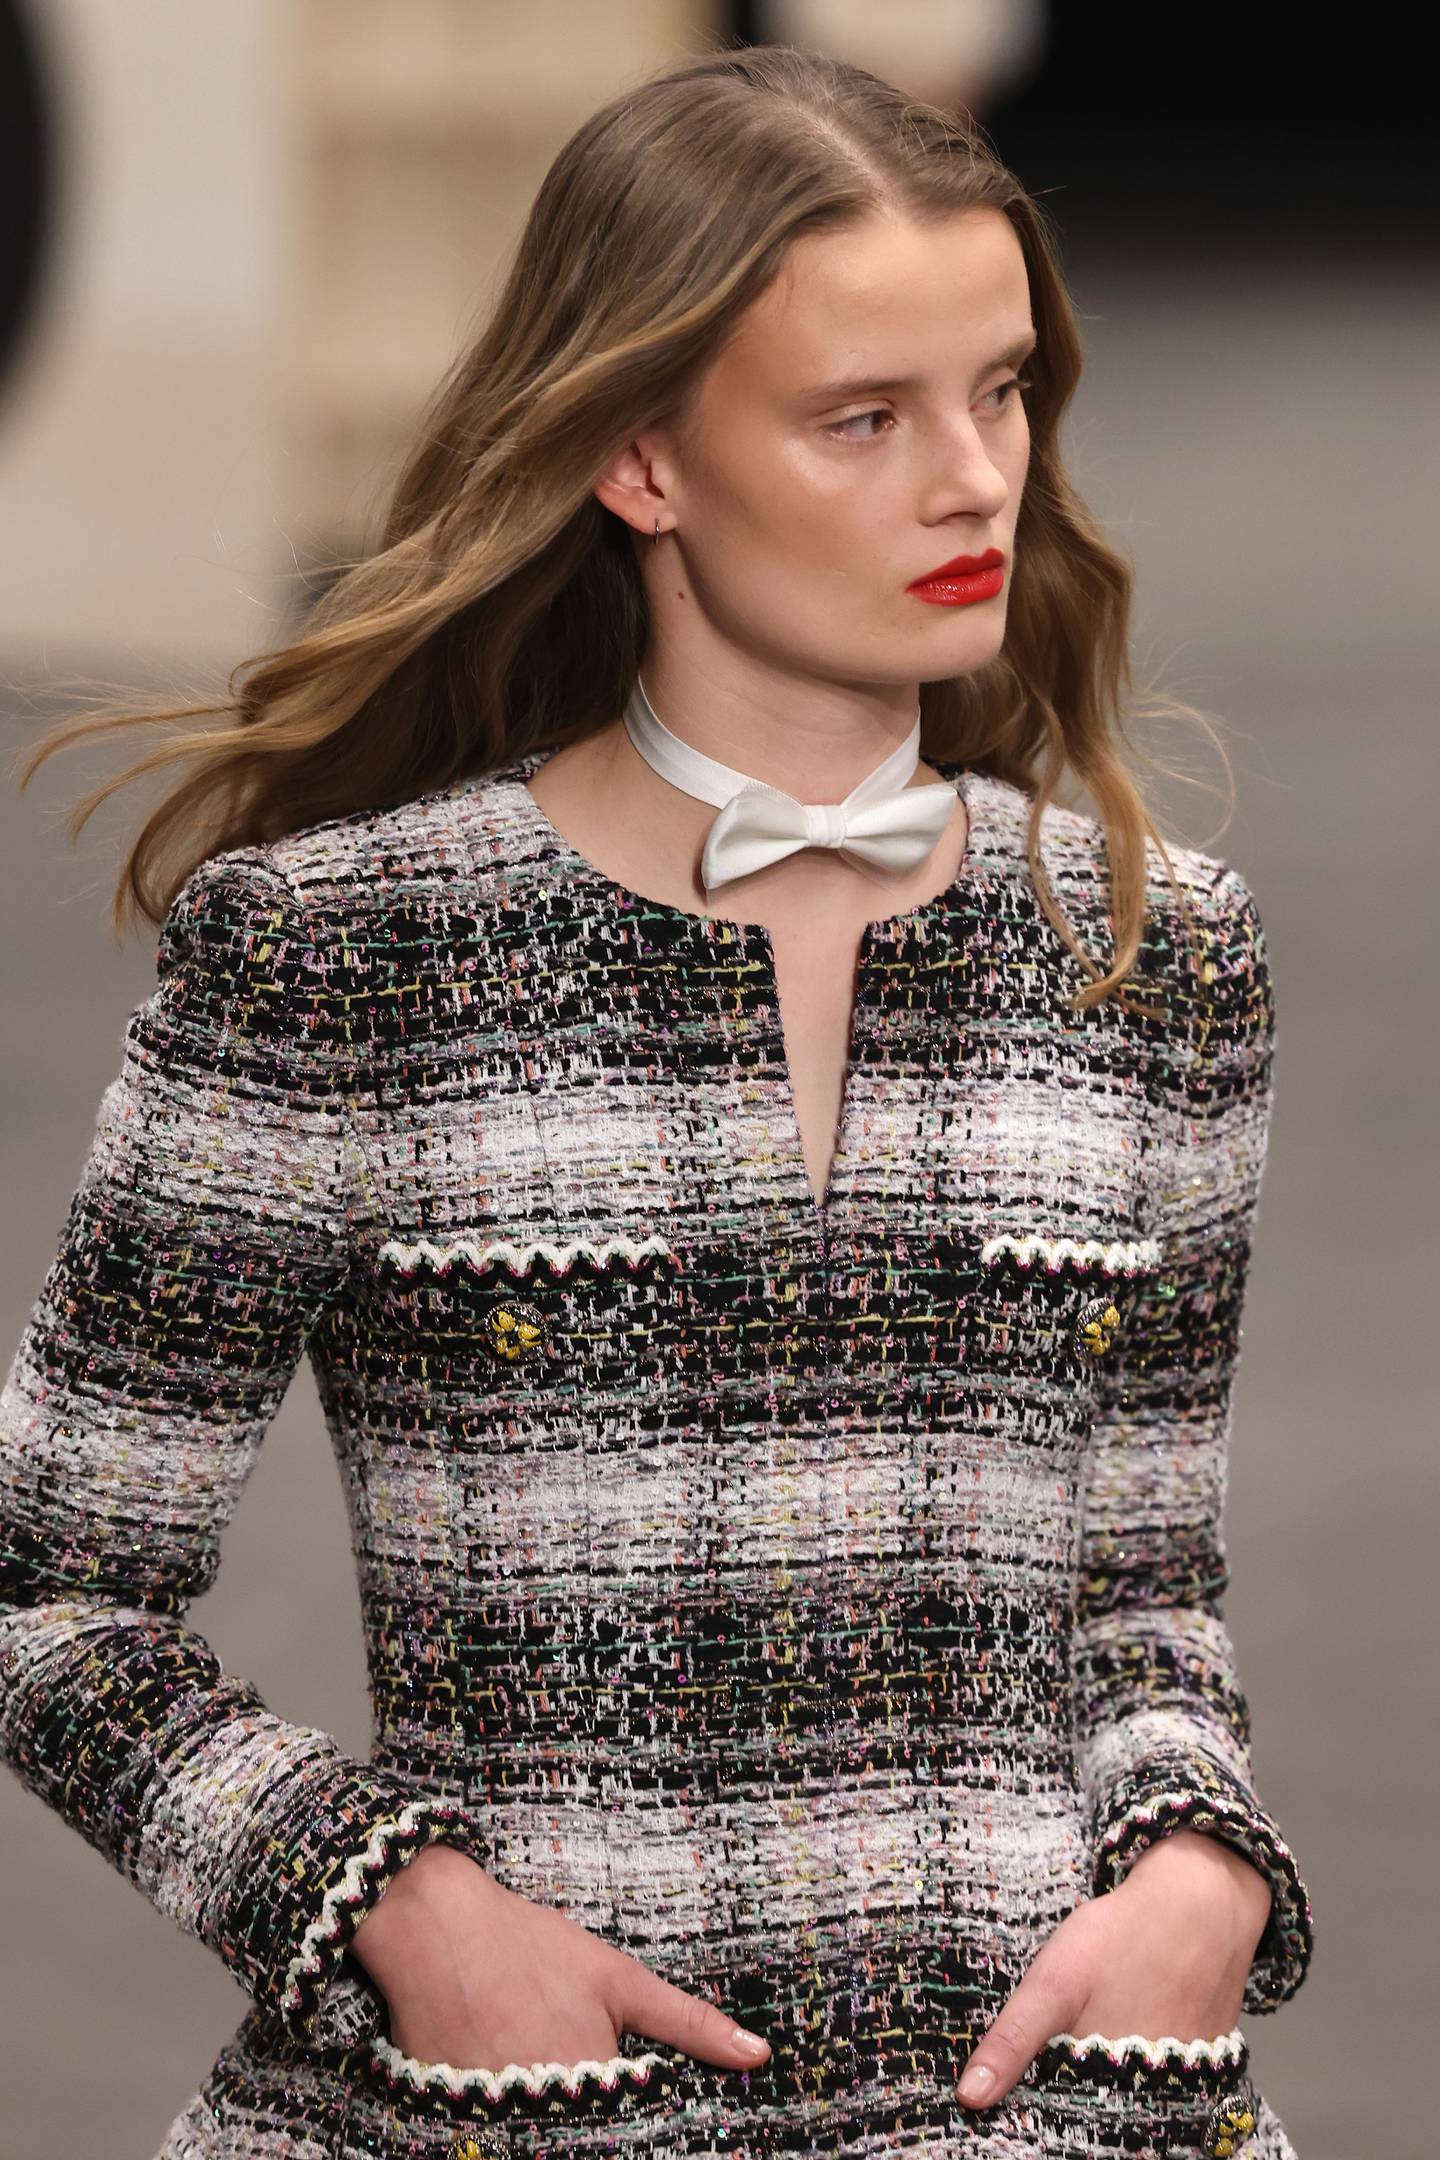 For the Chanel Haute Couture spring/summer 2023 show, tweed was given an almost playful reimagining. Getty Images